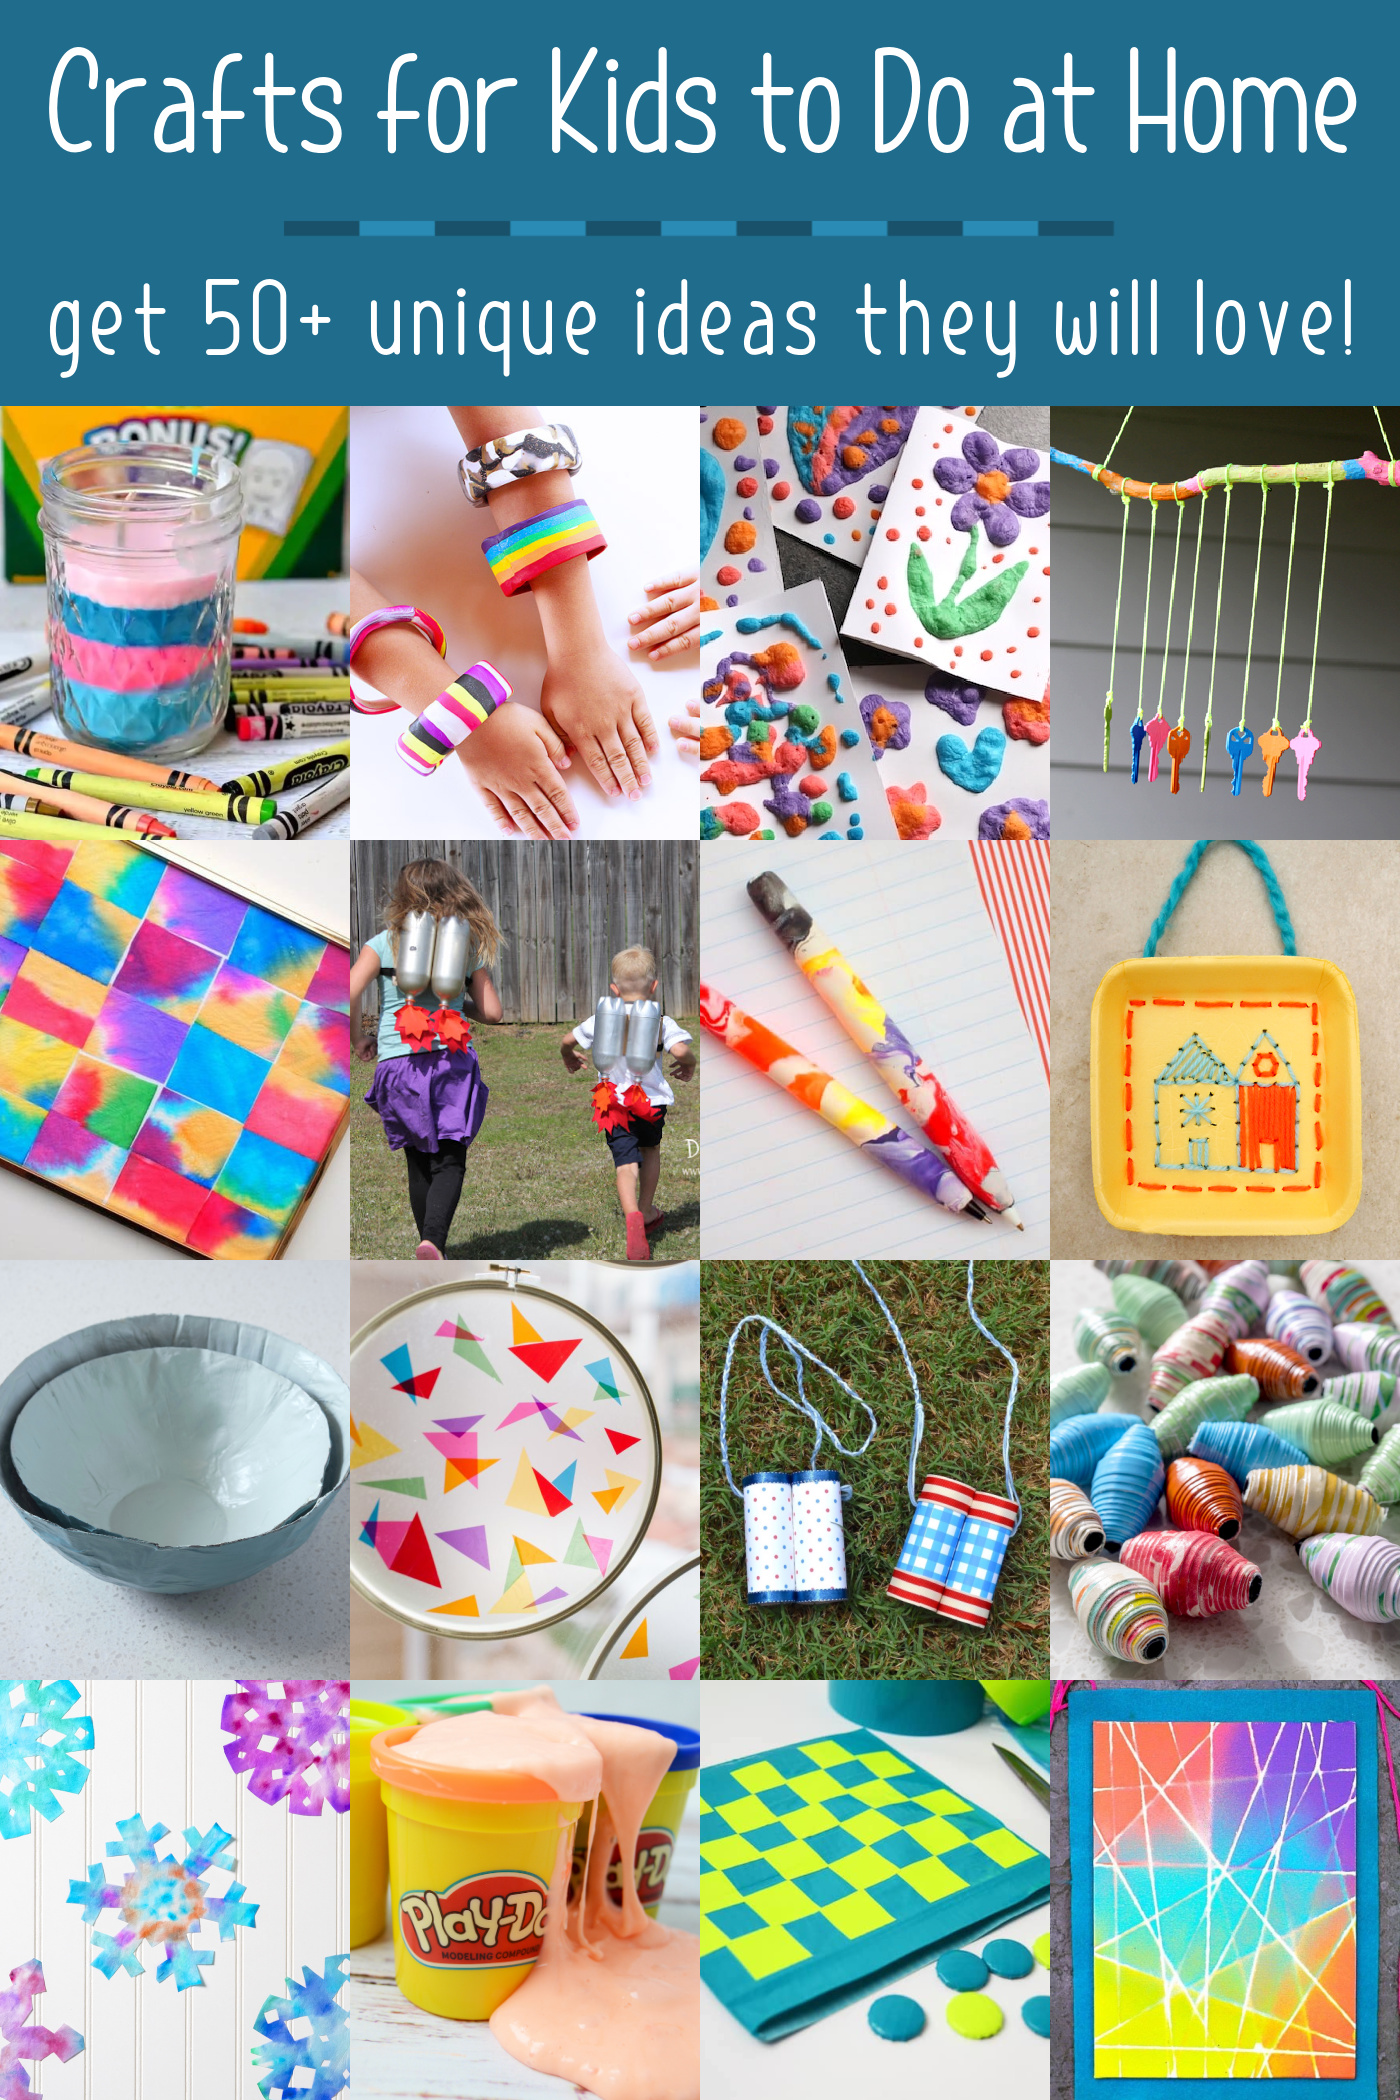 Crafts for Kids to Do at Home